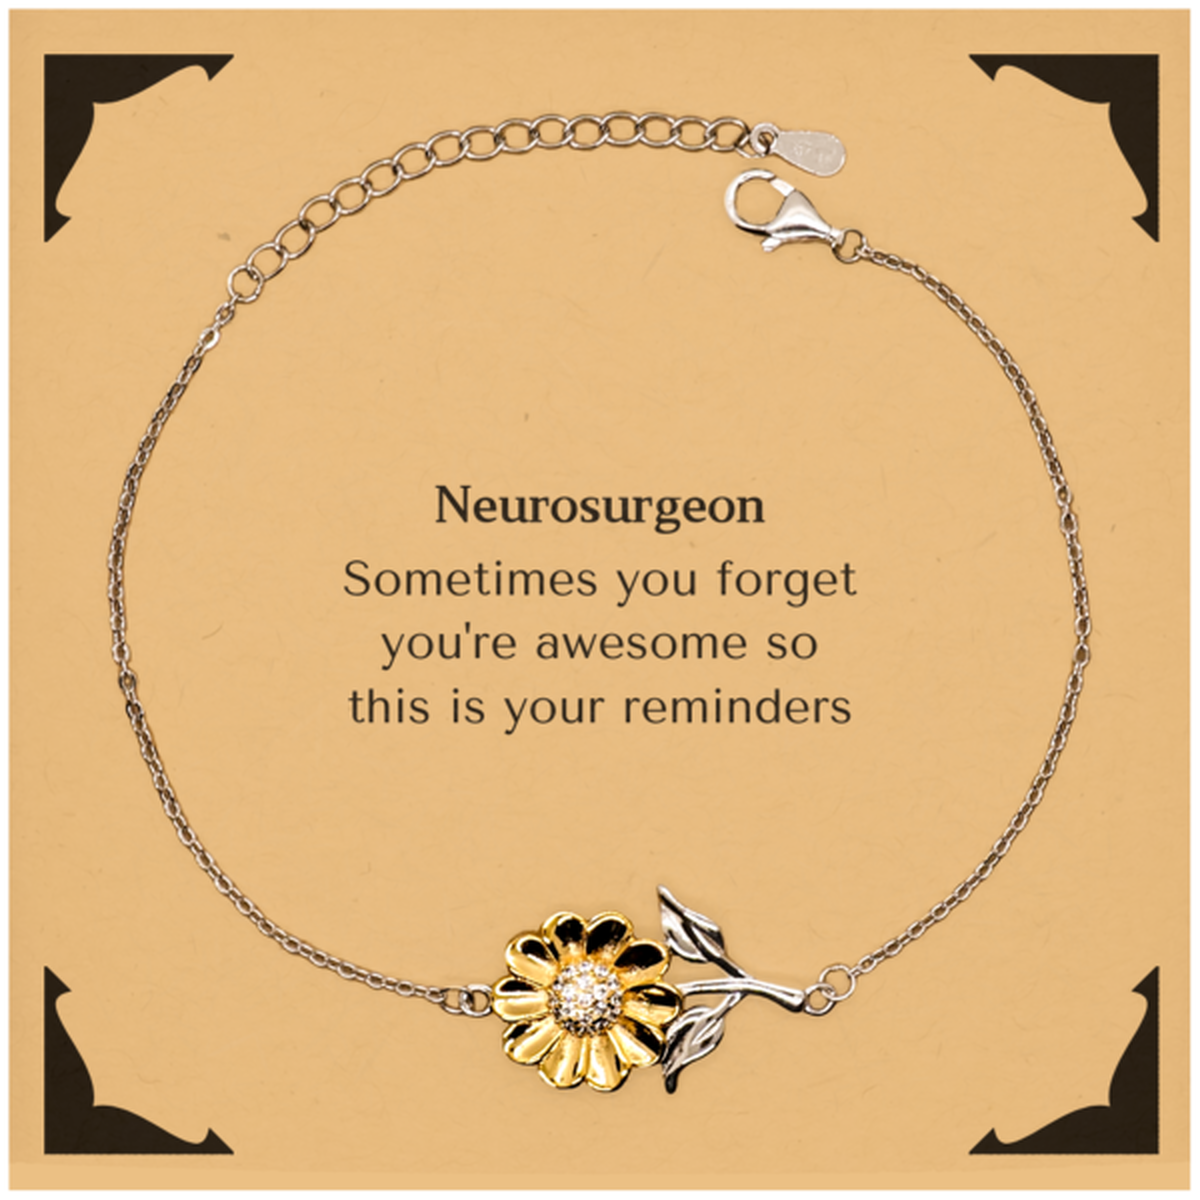 Sentimental Neurosurgeon Sunflower Bracelet, Neurosurgeon Sometimes you forget you're awesome so this is your reminders, Graduation Christmas Birthday Gifts for Neurosurgeon, Men, Women, Coworkers